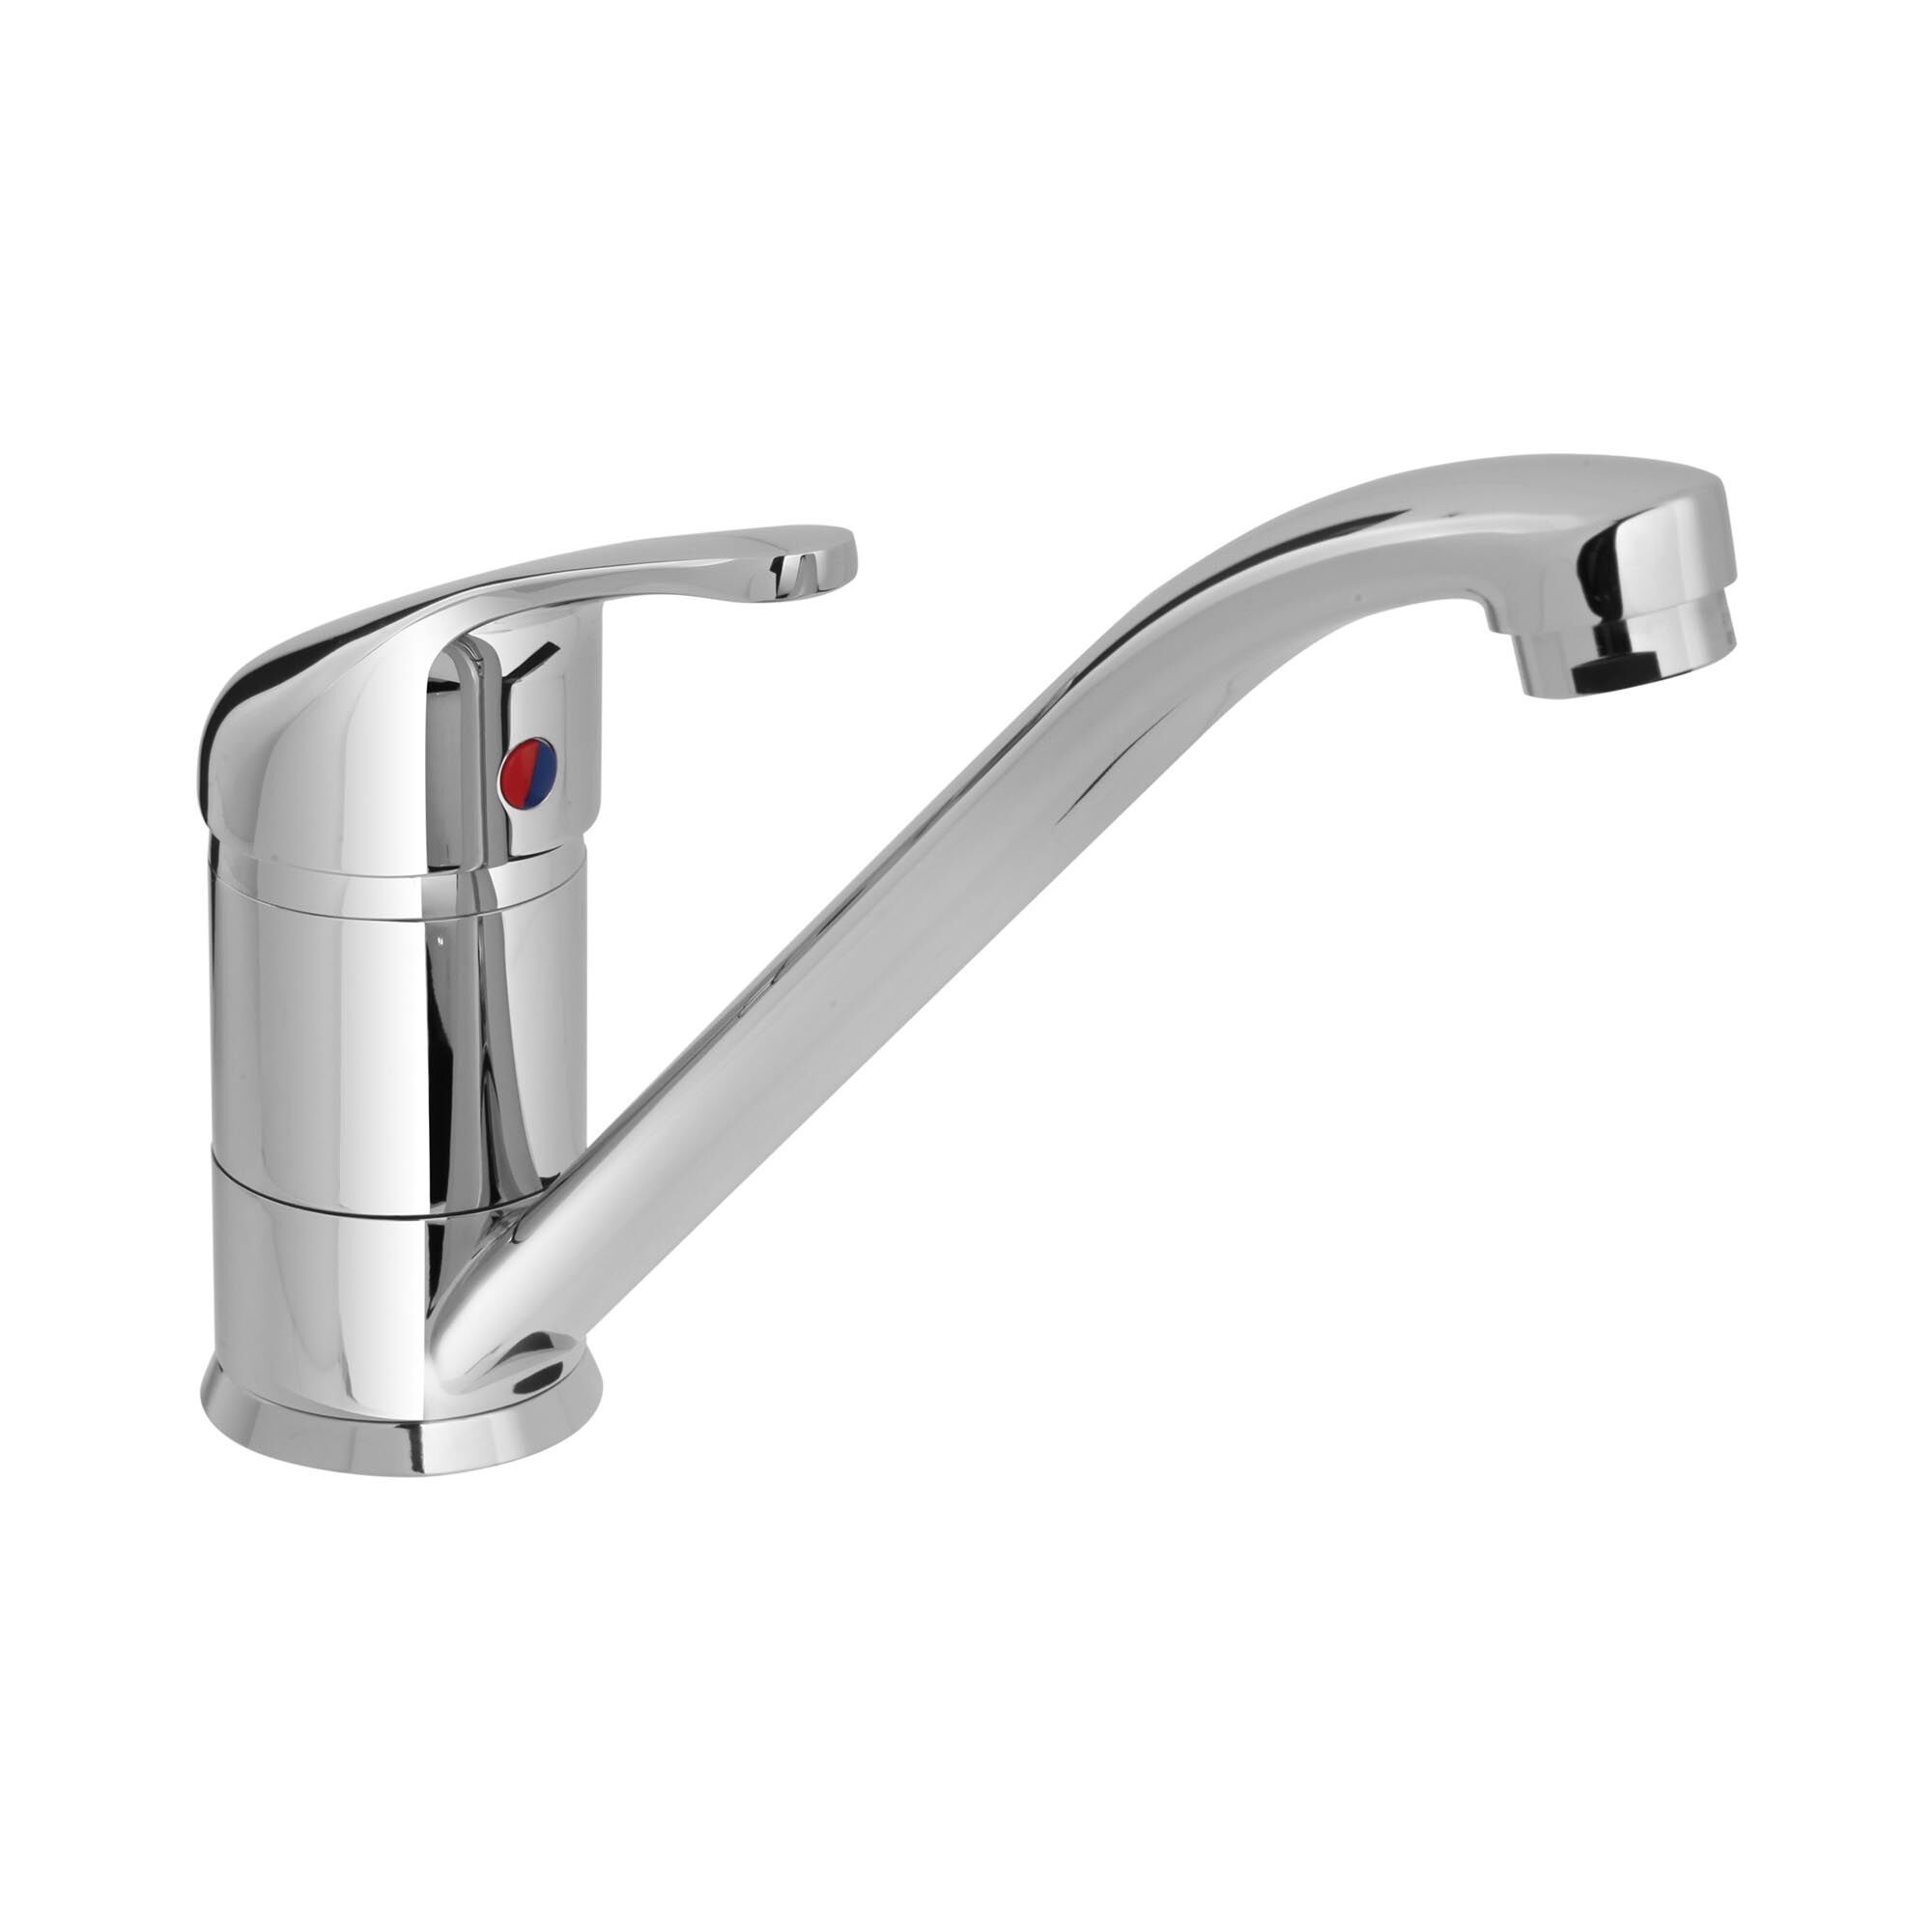 Monolith kitchen sink mixer tap - tap 215 mm - Chrome-plated brass